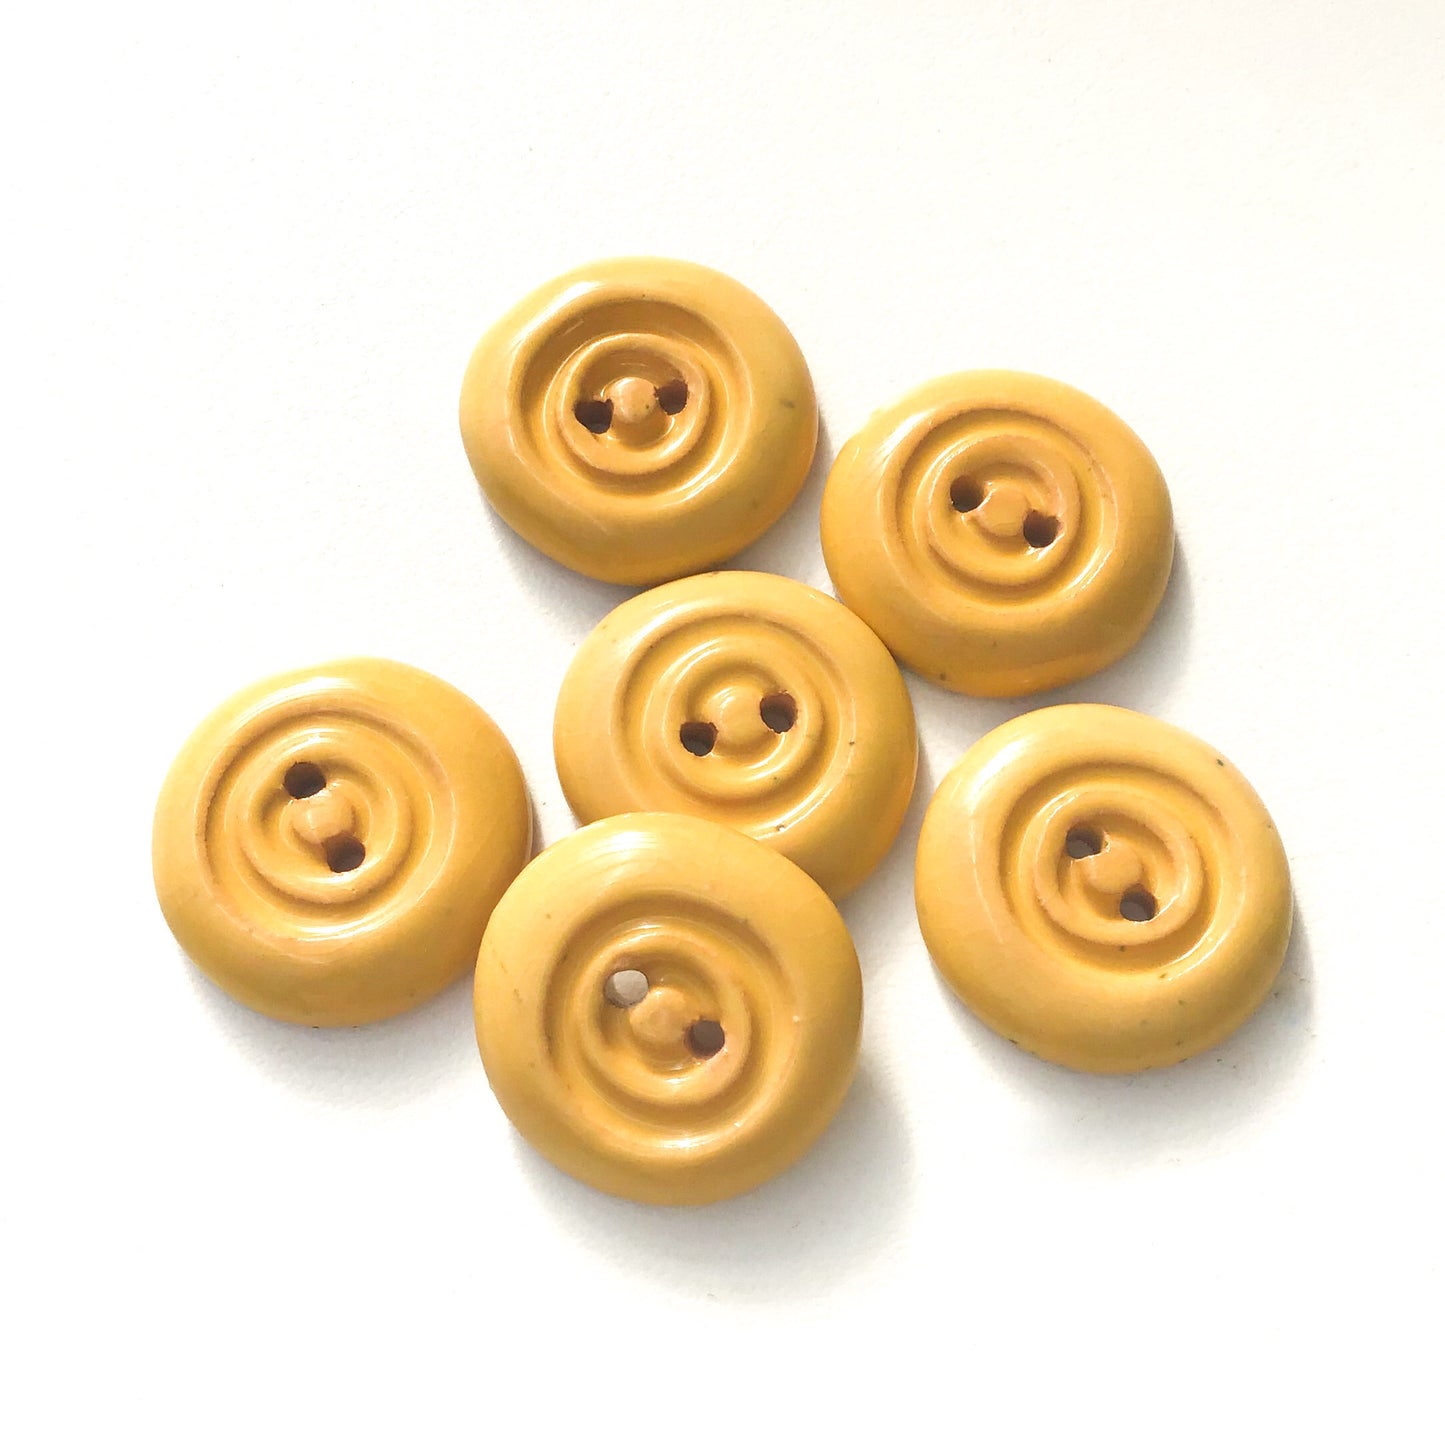 Soft Yellow Concentric Circle Ceramic Buttons - Earthy Clay Buttons - 1/2" - 6 Pack